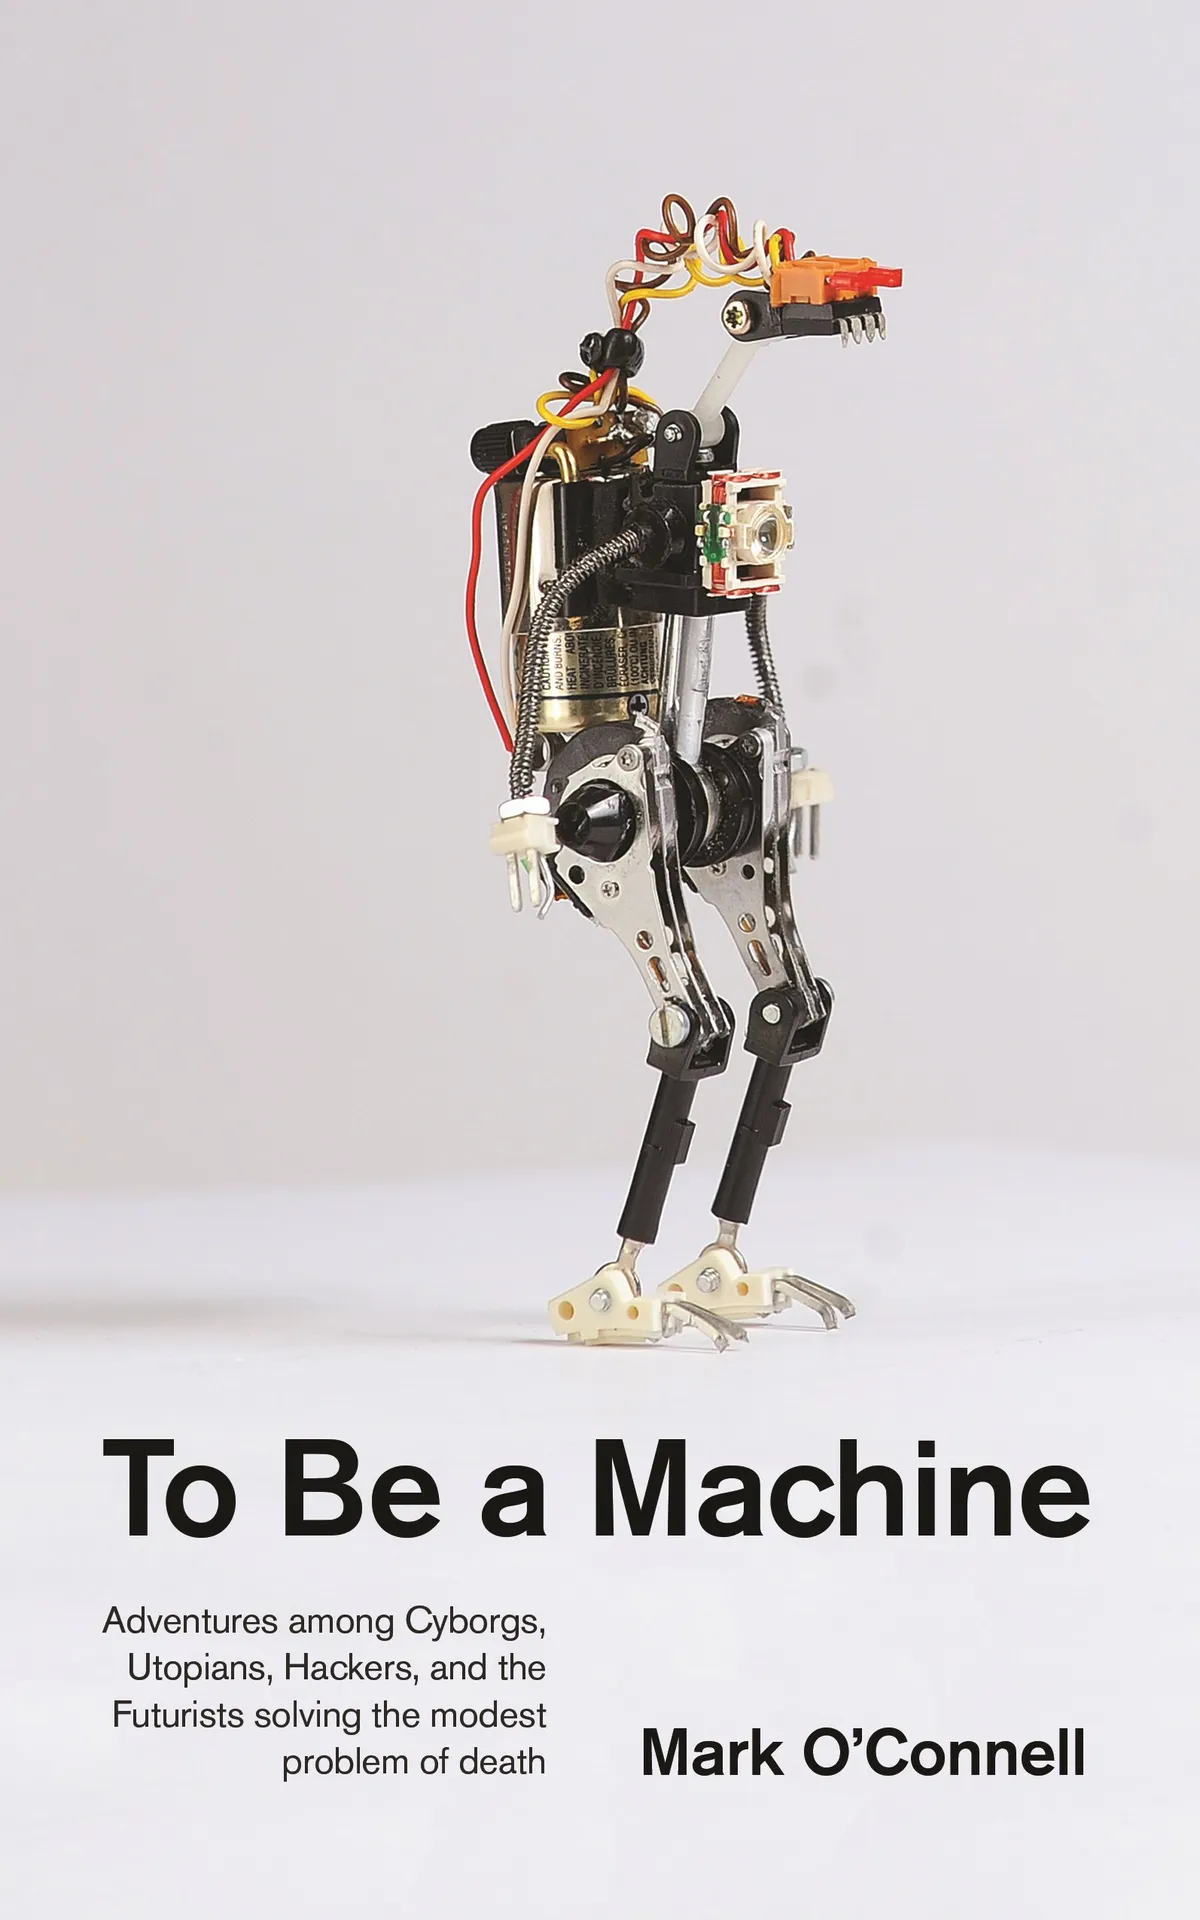 To Be a Machine by Mark O’Connell is available now (£12.99, Granta)